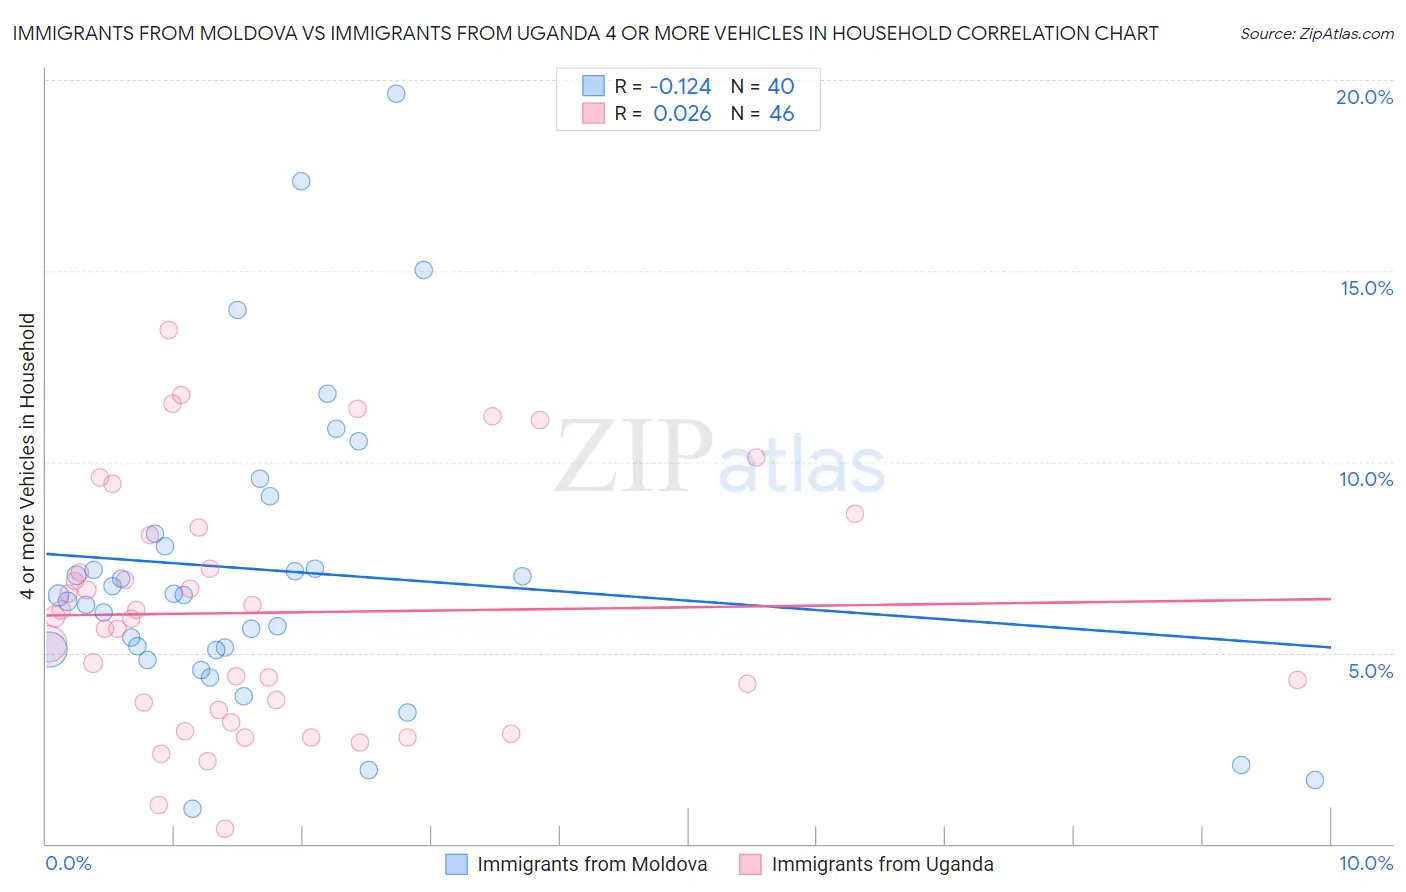 Immigrants from Moldova vs Immigrants from Uganda 4 or more Vehicles in Household